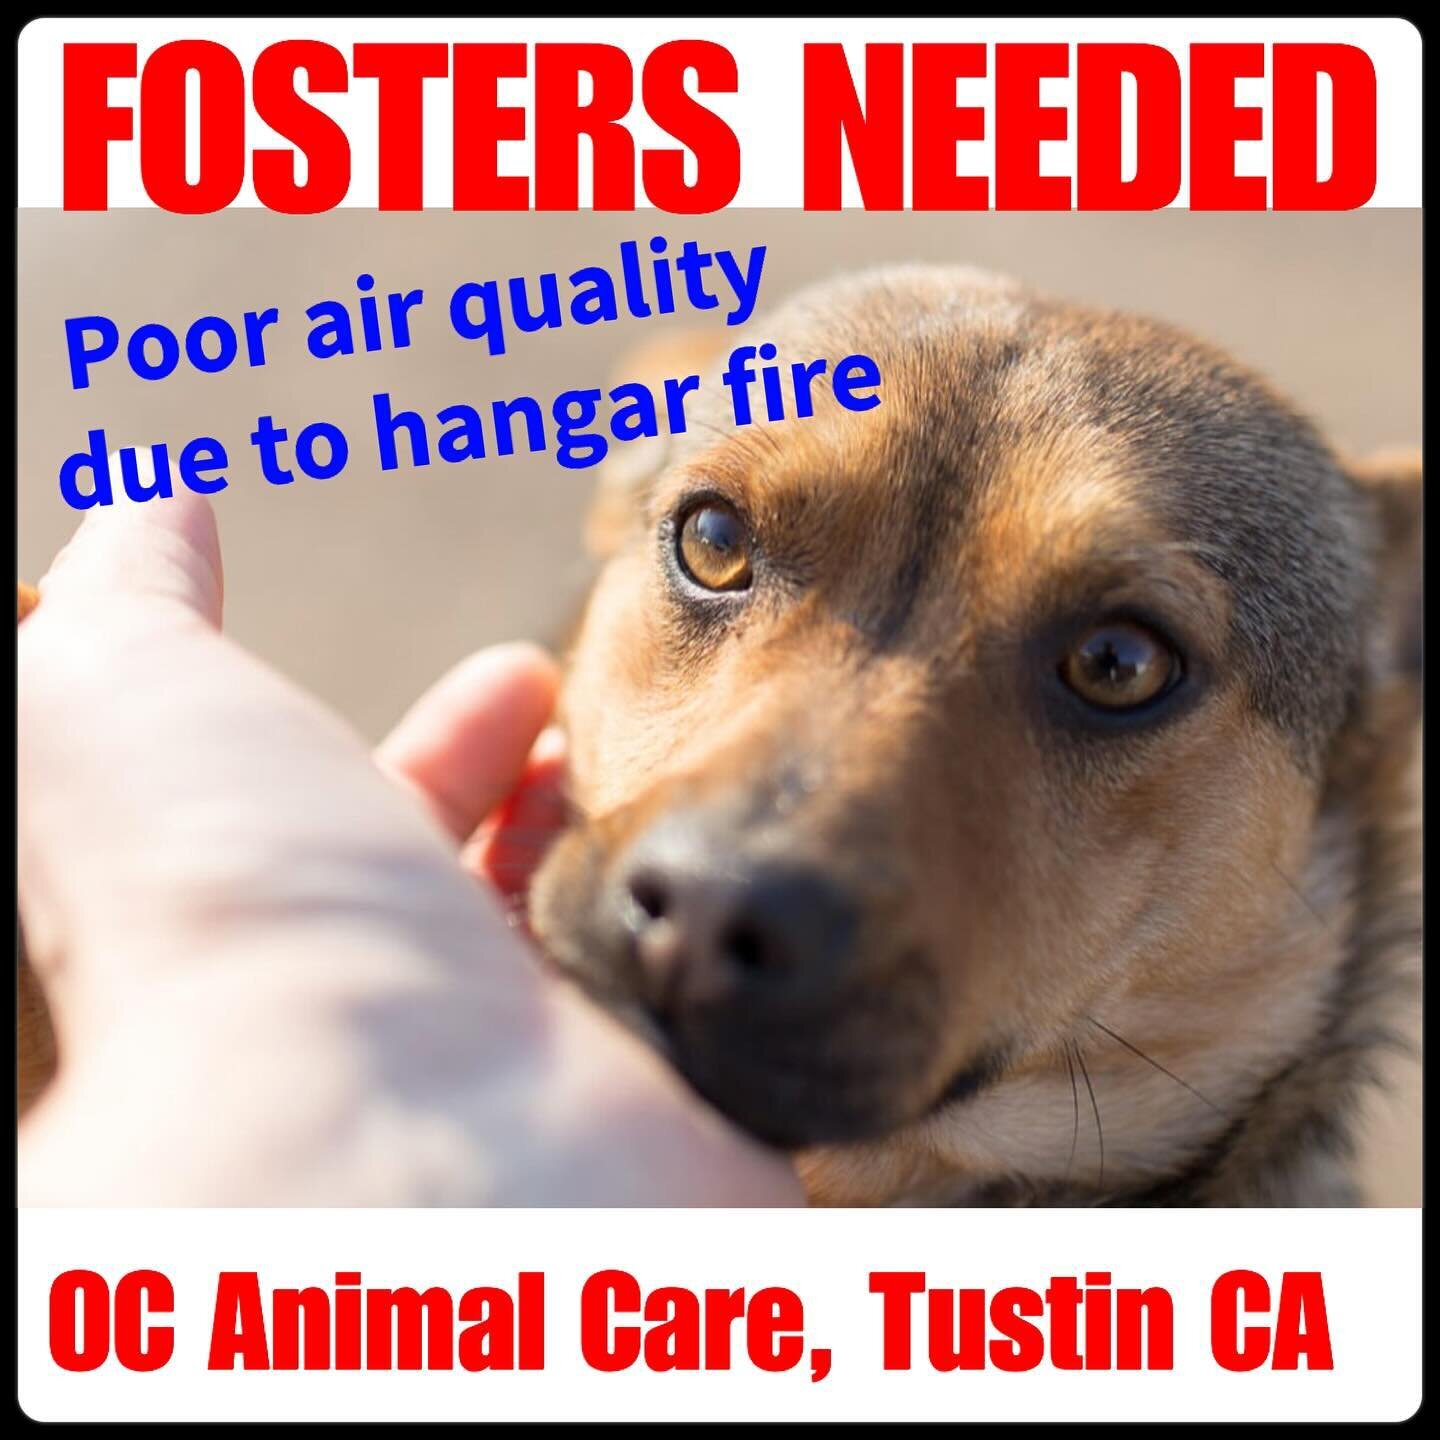 OC Animal Care in Tustin, CA needs fosters now! All dogs housed in their outdoor kennels were brought inside due to poor air quality from the recent fire at the north hangar at the former Marine Corps Air Station, but there is not enough space.  If y